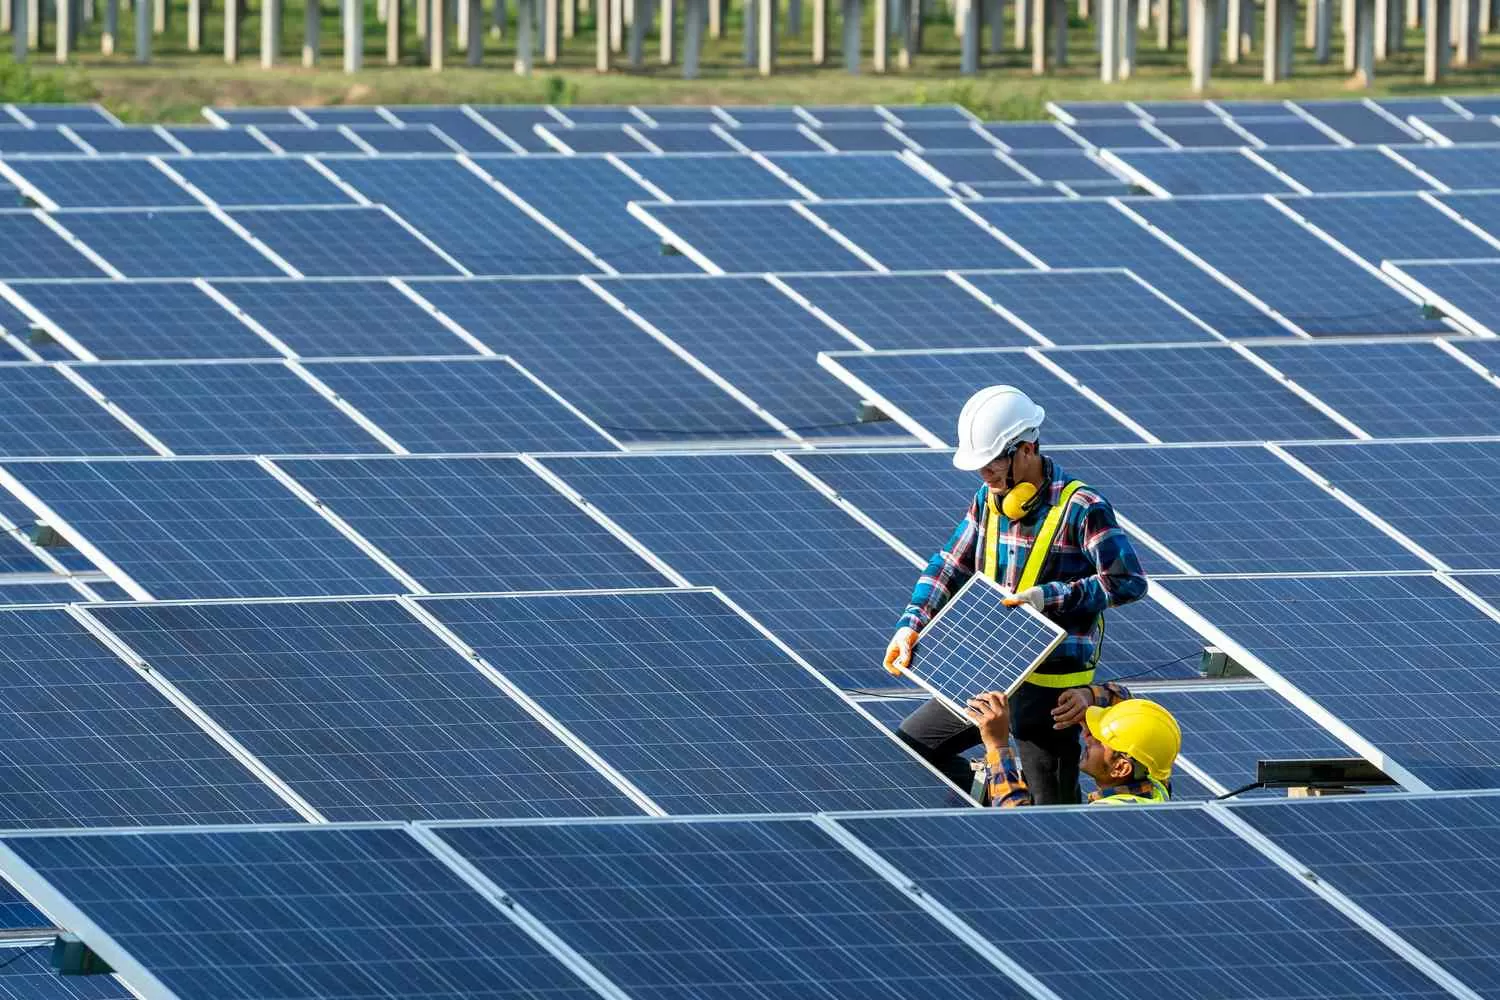 IEA: Solar PV to contribute more than half of new power capacity to 2030